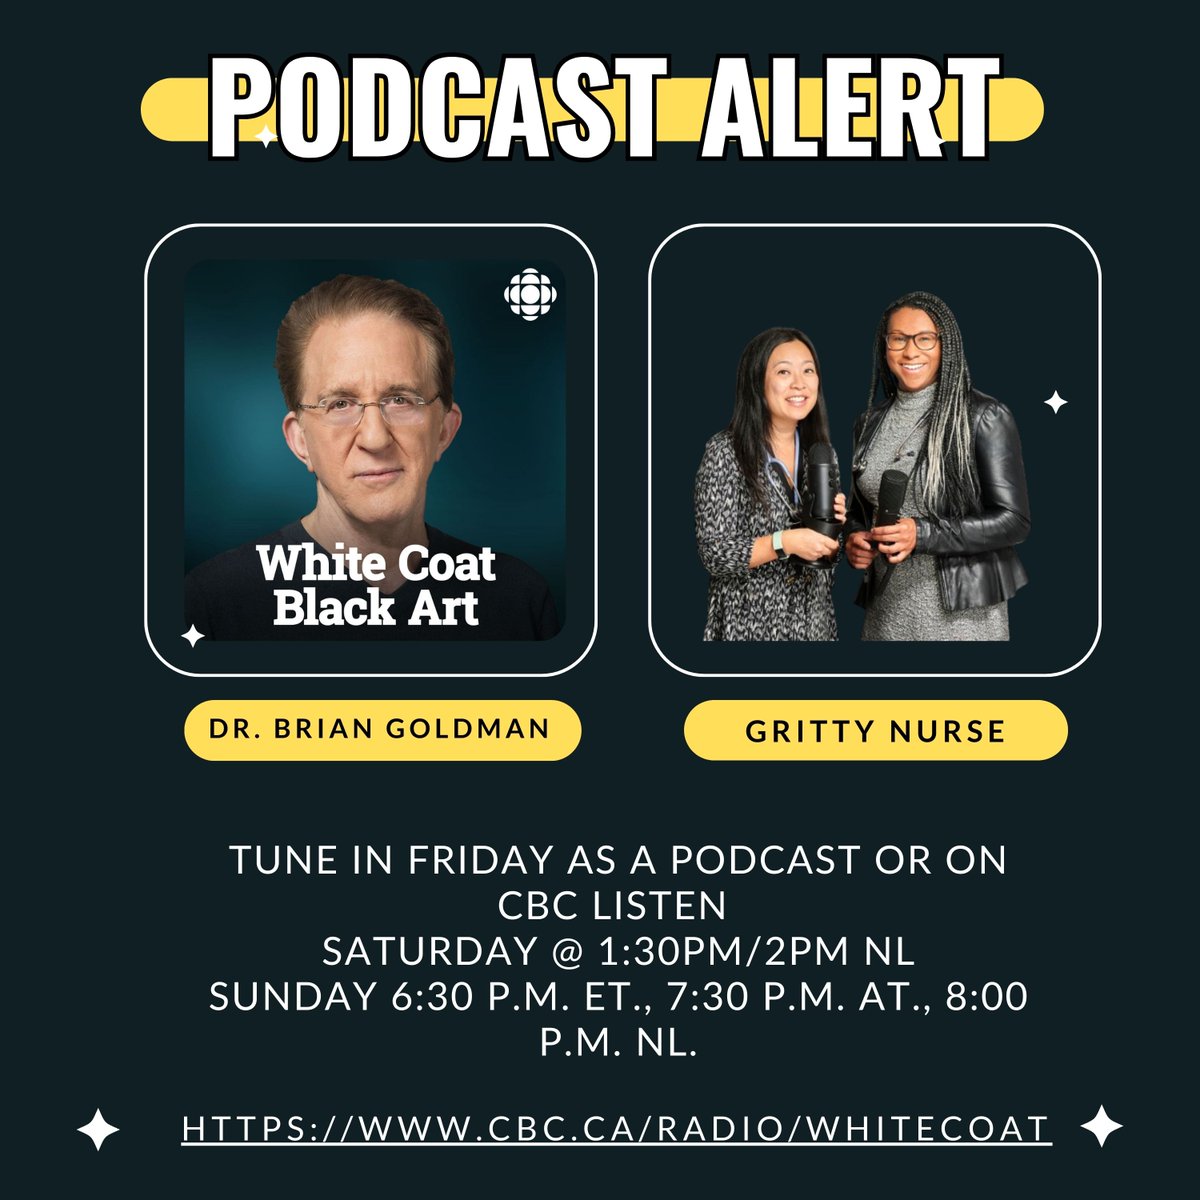 PODCAST ALERT🚨🚨🚨 Please tune into @cbcwhitecoat @NightShiftMD this Friday, Saturday and Sunday! Thank you to @NightShiftMD for such a thought-provoking interview!! Nurses need to be heard, and we are grateful for every opportunity we have to share our insights! @CBCRadioCanada